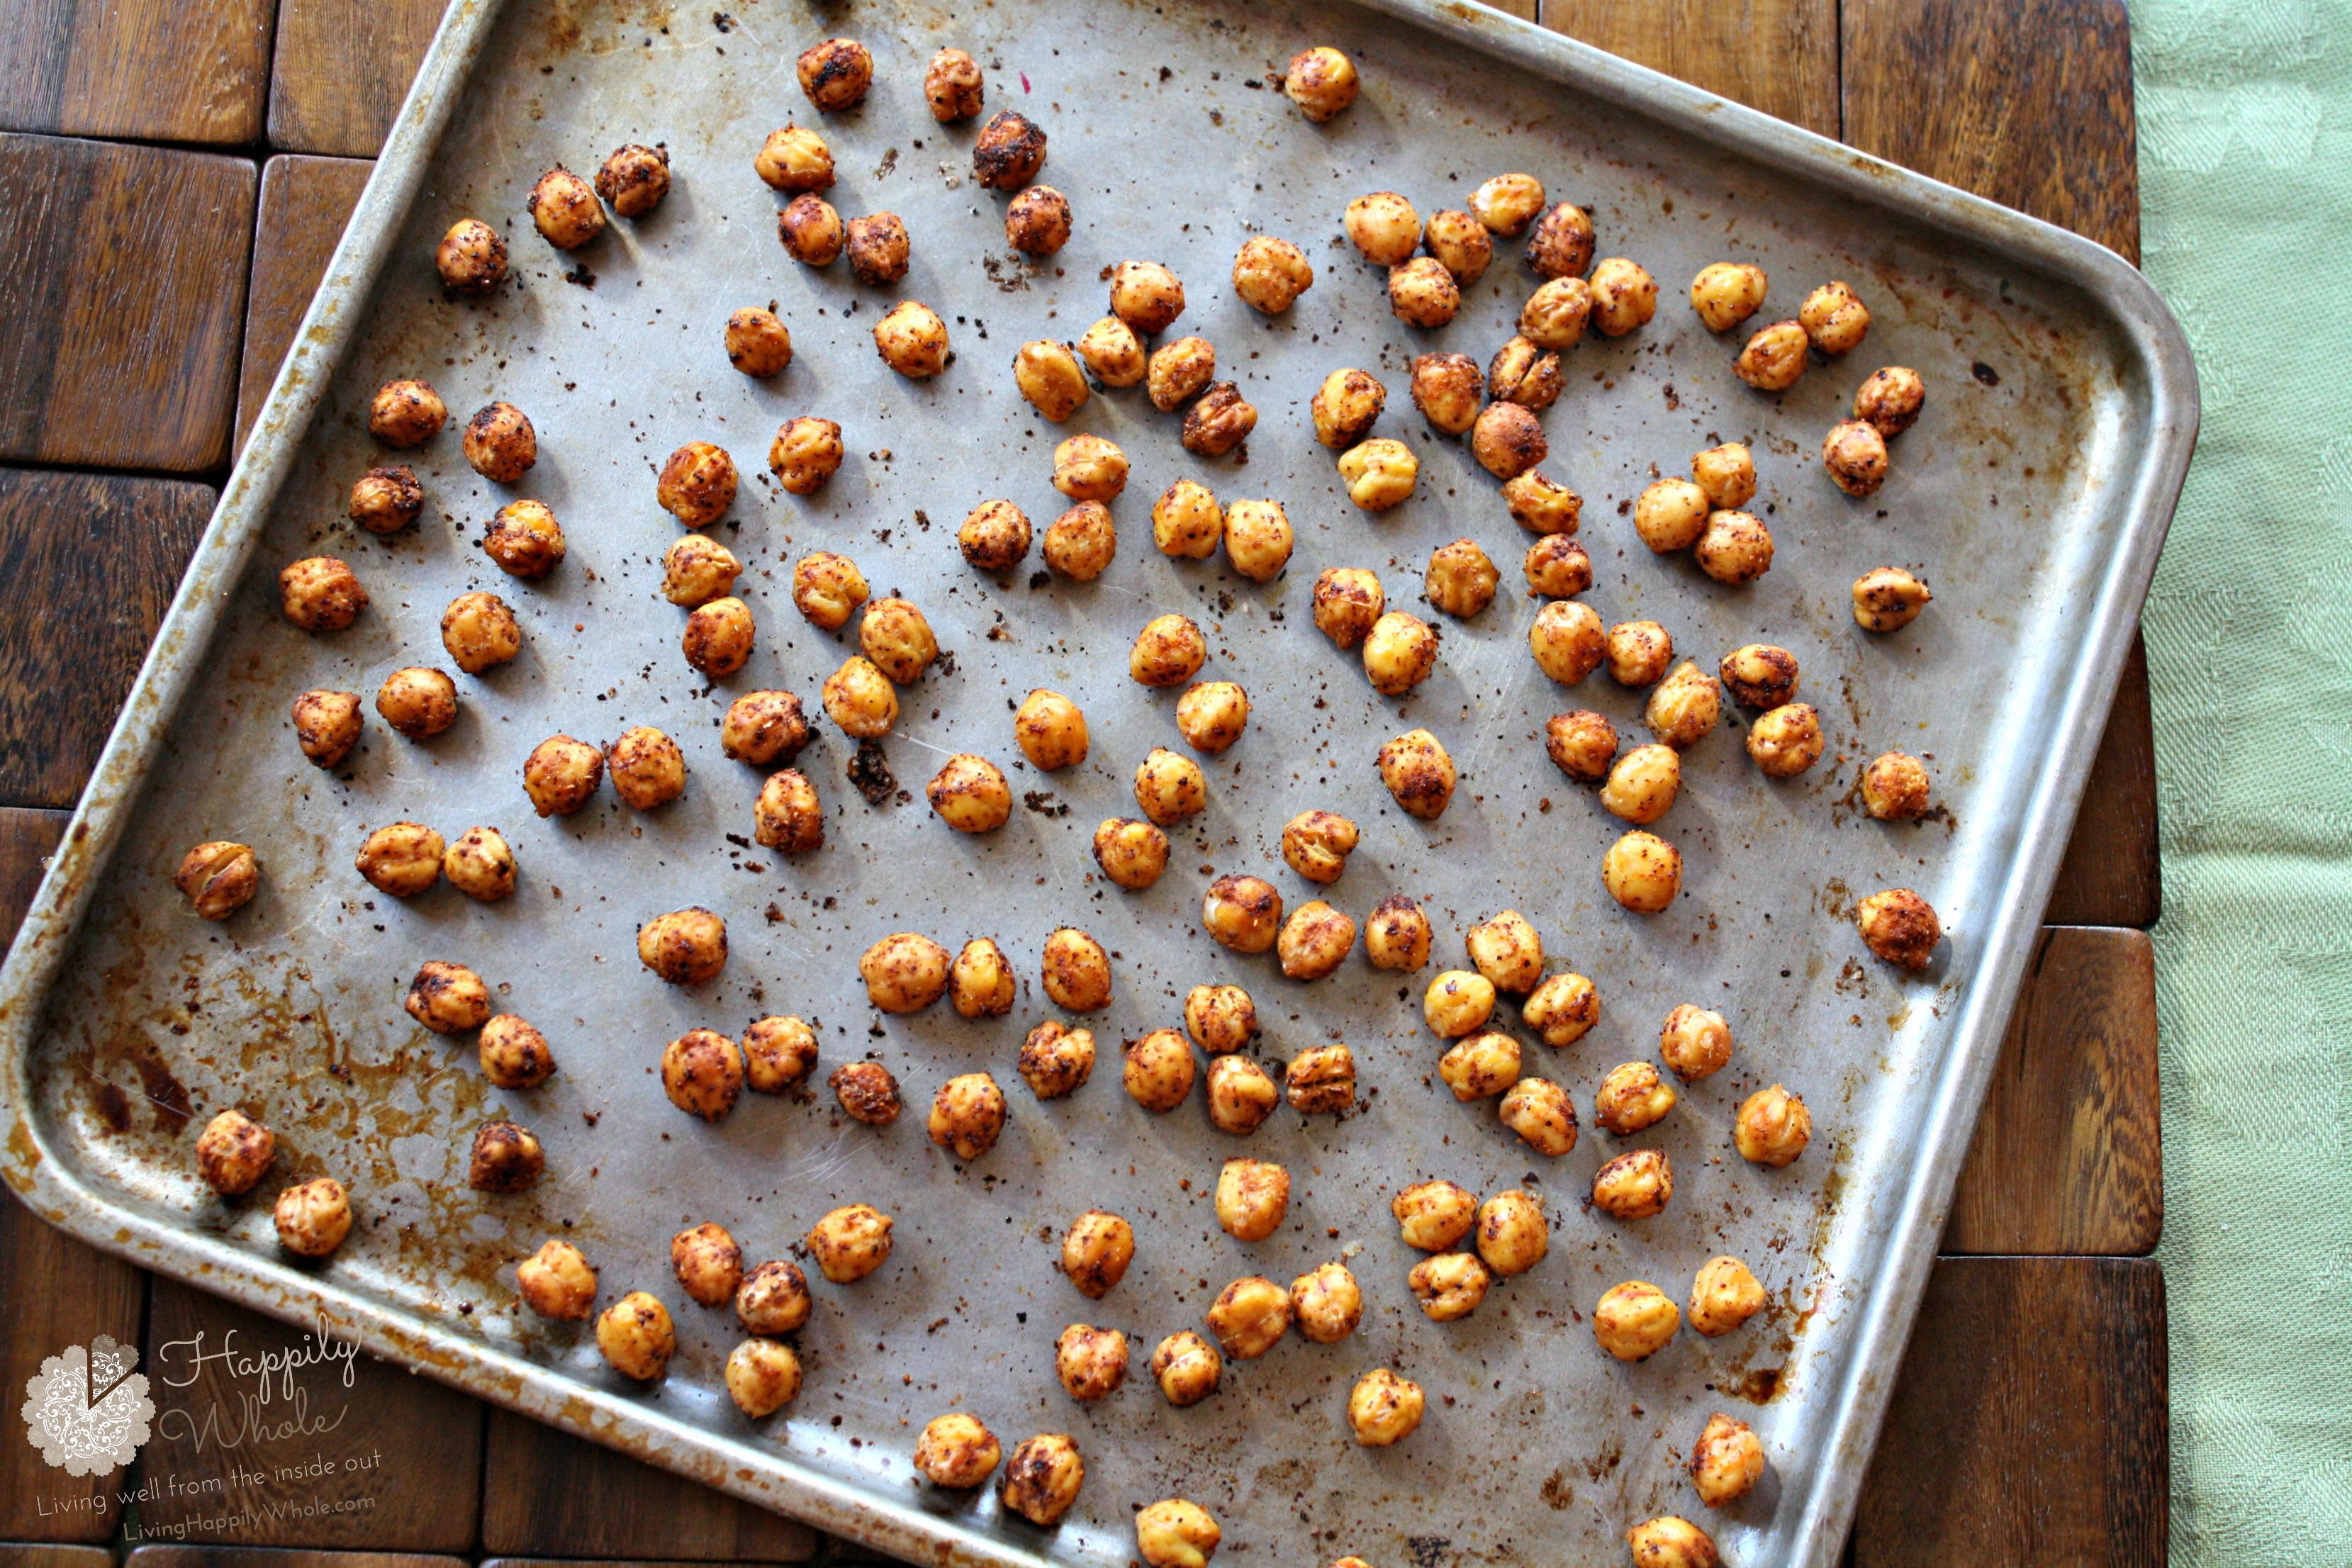 A Simple, Savory Chickpea Snack